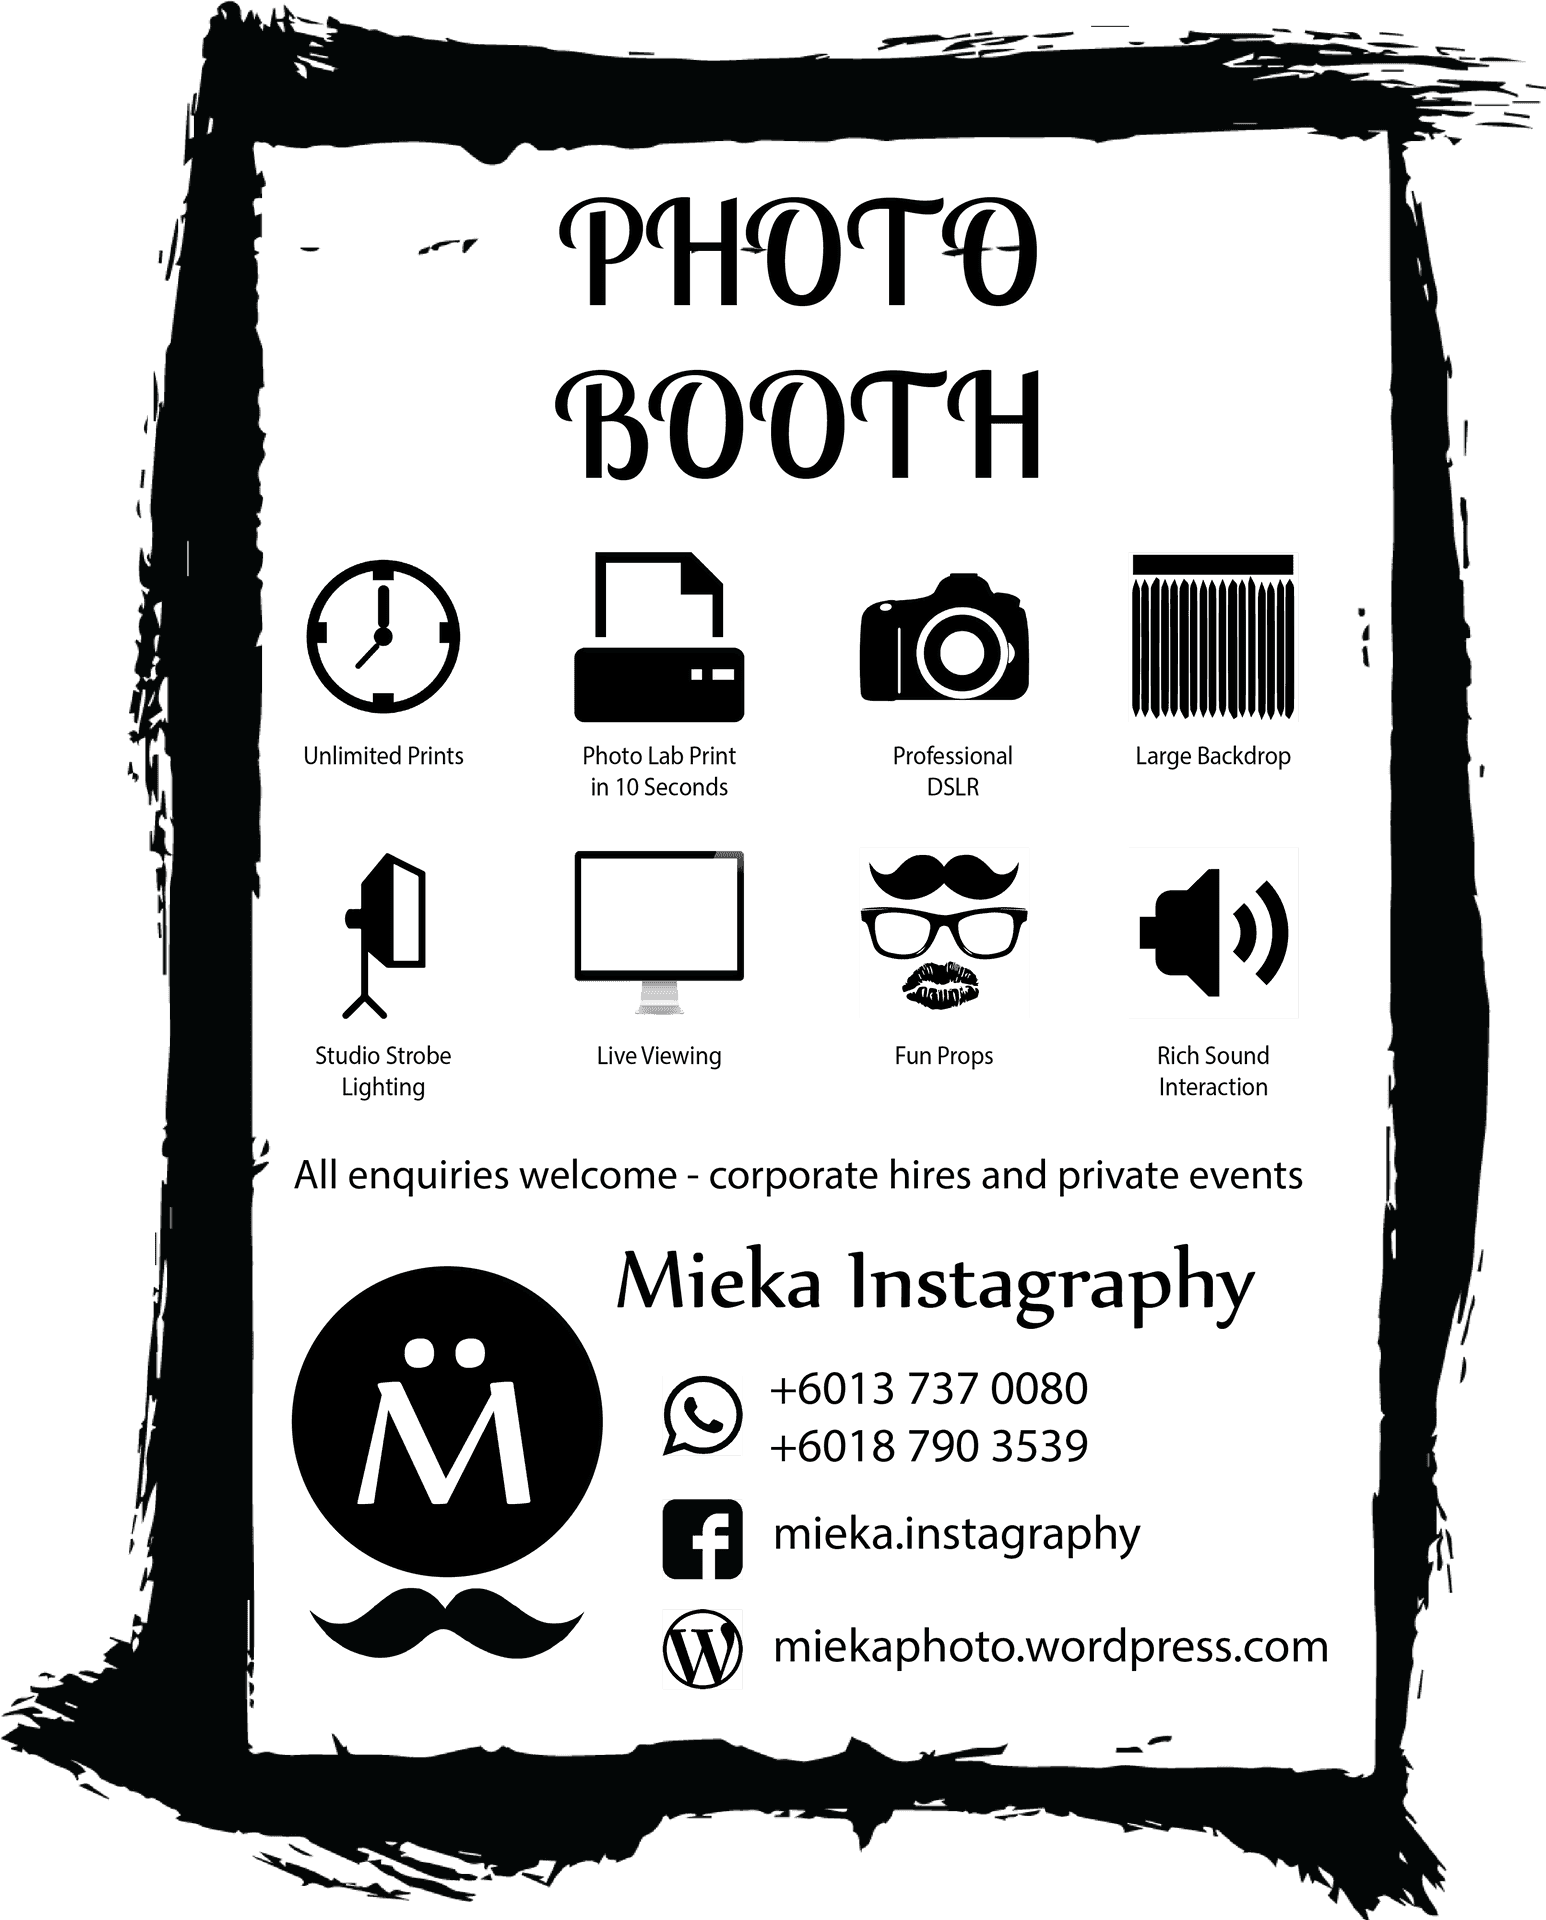 Photobooth Services Advertisement PNG